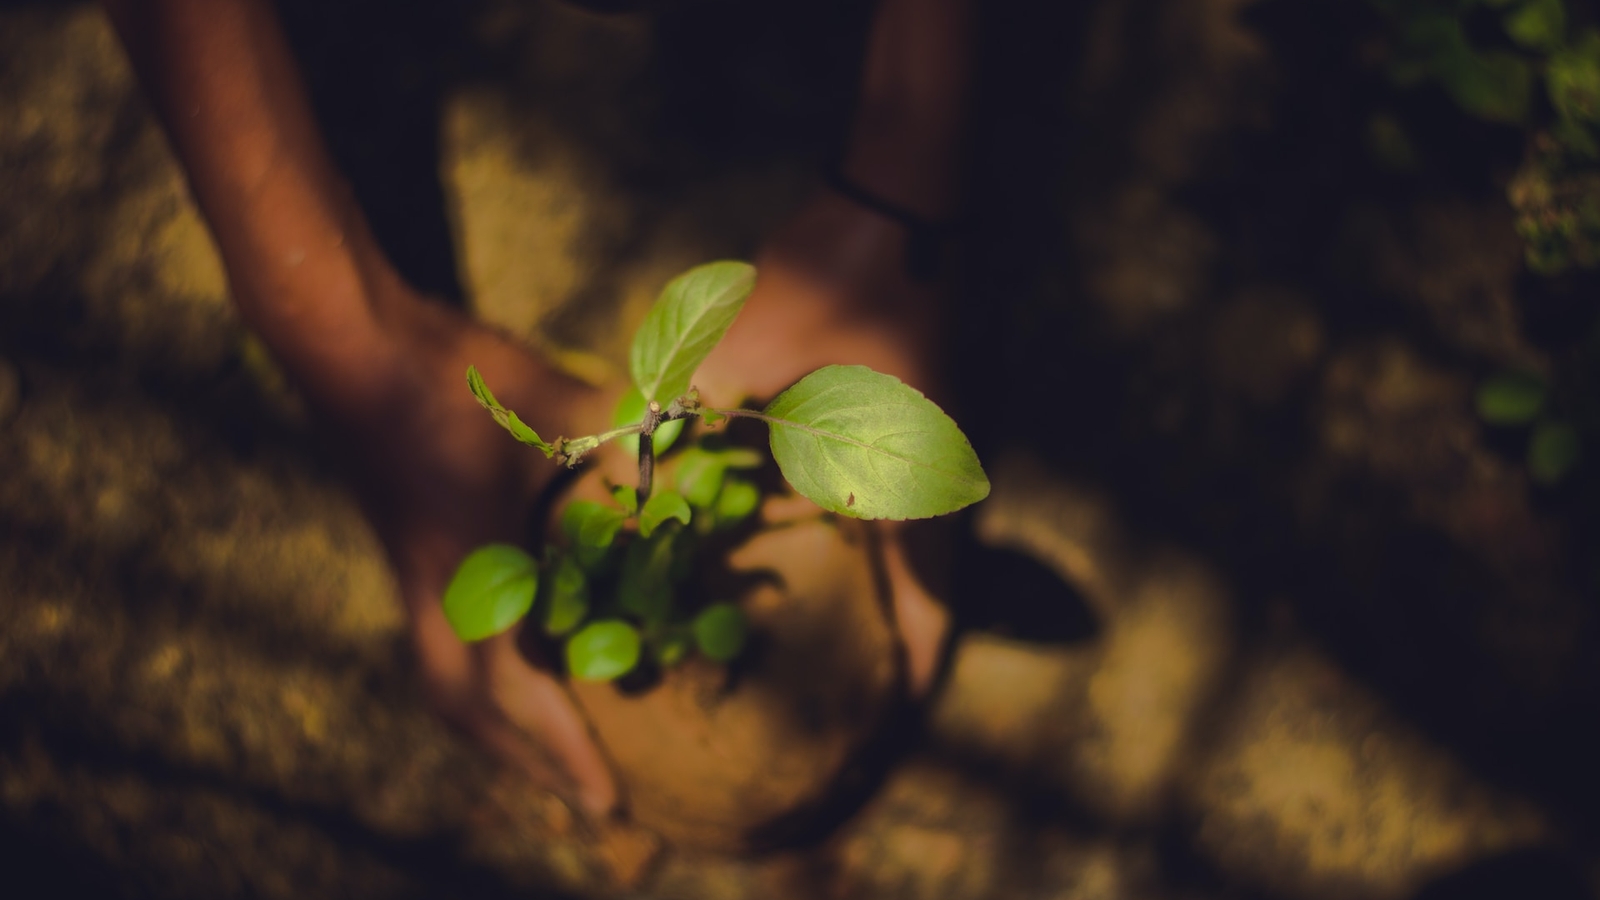 A pair of hands around a plant as someone plants a tree sapling